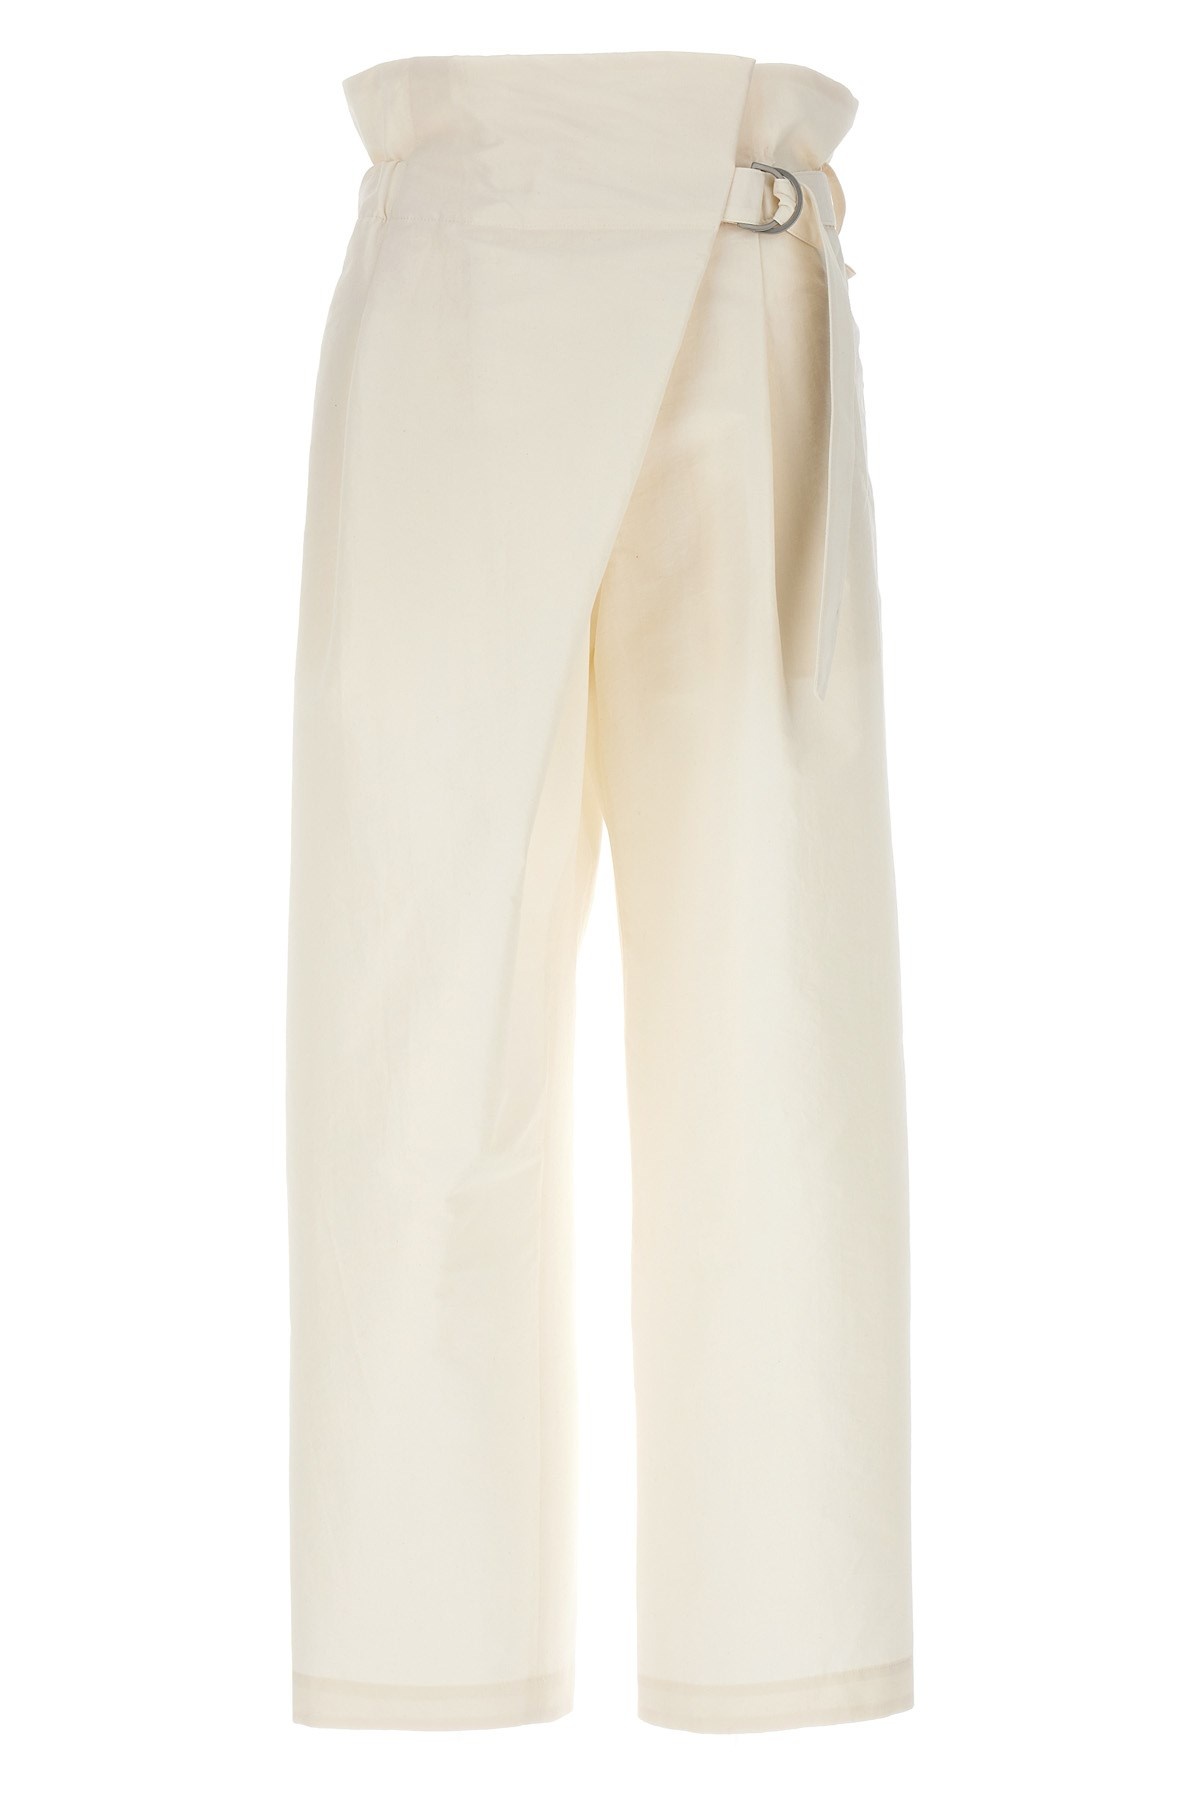 'Enfold' trousers - 1